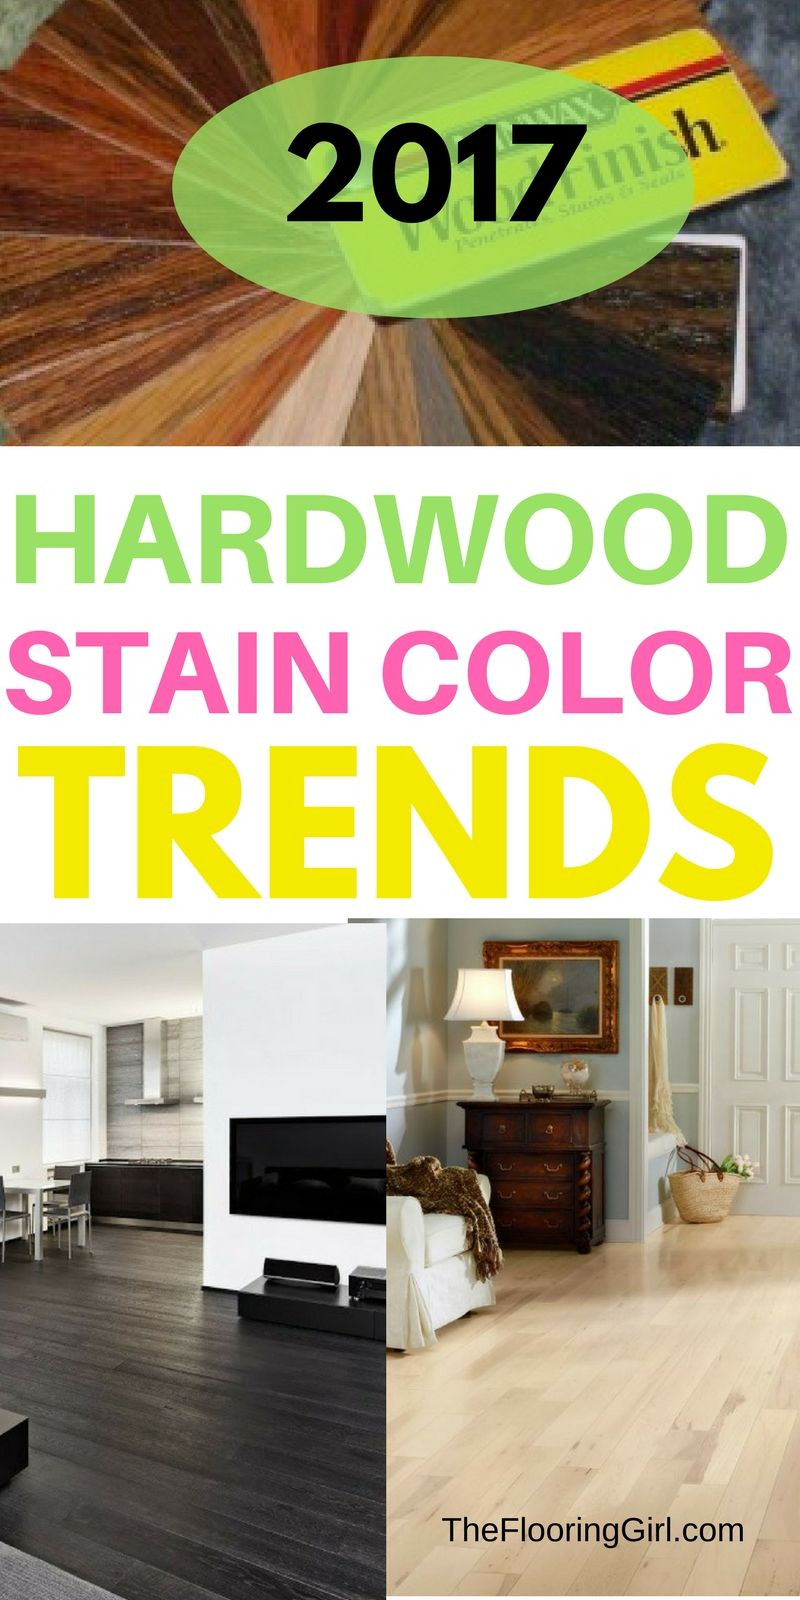 21 Famous Hardwood Floor Cleaning Companies 2024 free download hardwood floor cleaning companies of hardwood flooring stain color trends 2018 more from the flooring with hardwood flooring stain color trends for 2017 hardwood colors that are in style the